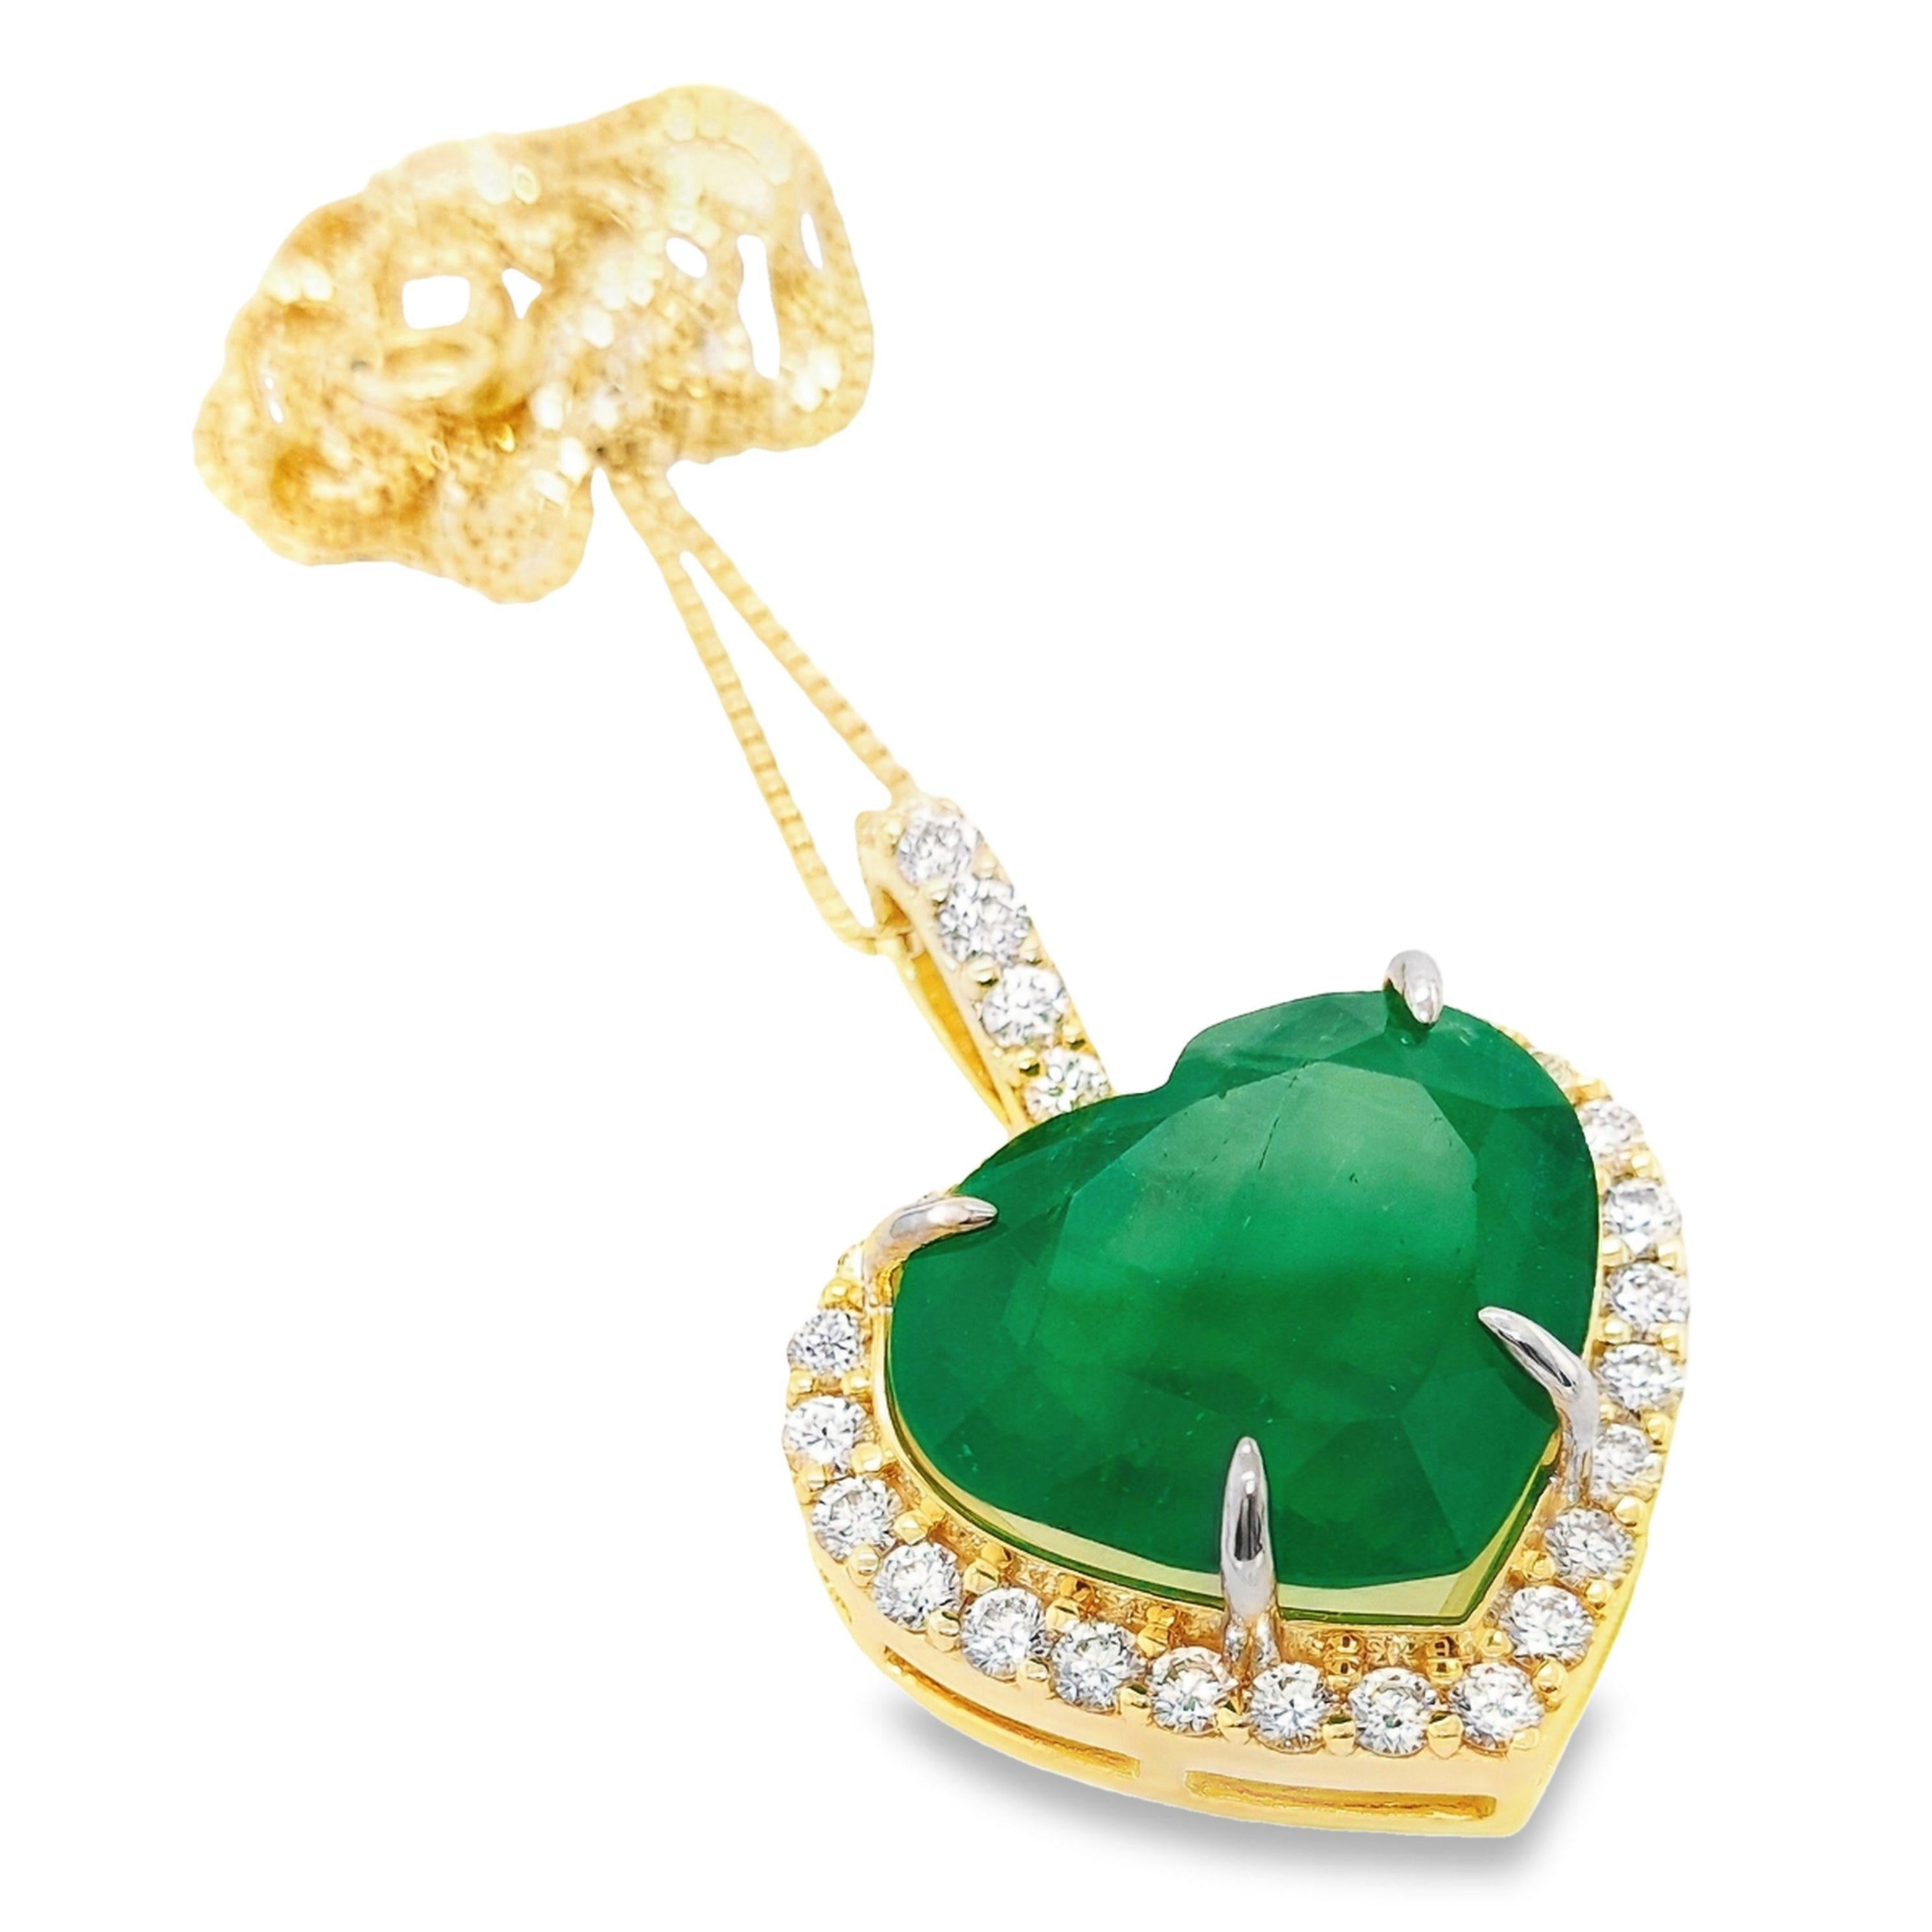 Drape yourself in lavish decadence with our 18K yellow gold necklace, featuring a striking pendant. The focal point is a breath-taking 21.20-carats natural Colombian emerald, adorned by 1.60-carats of naturally brilliant diamonds. This exclusive